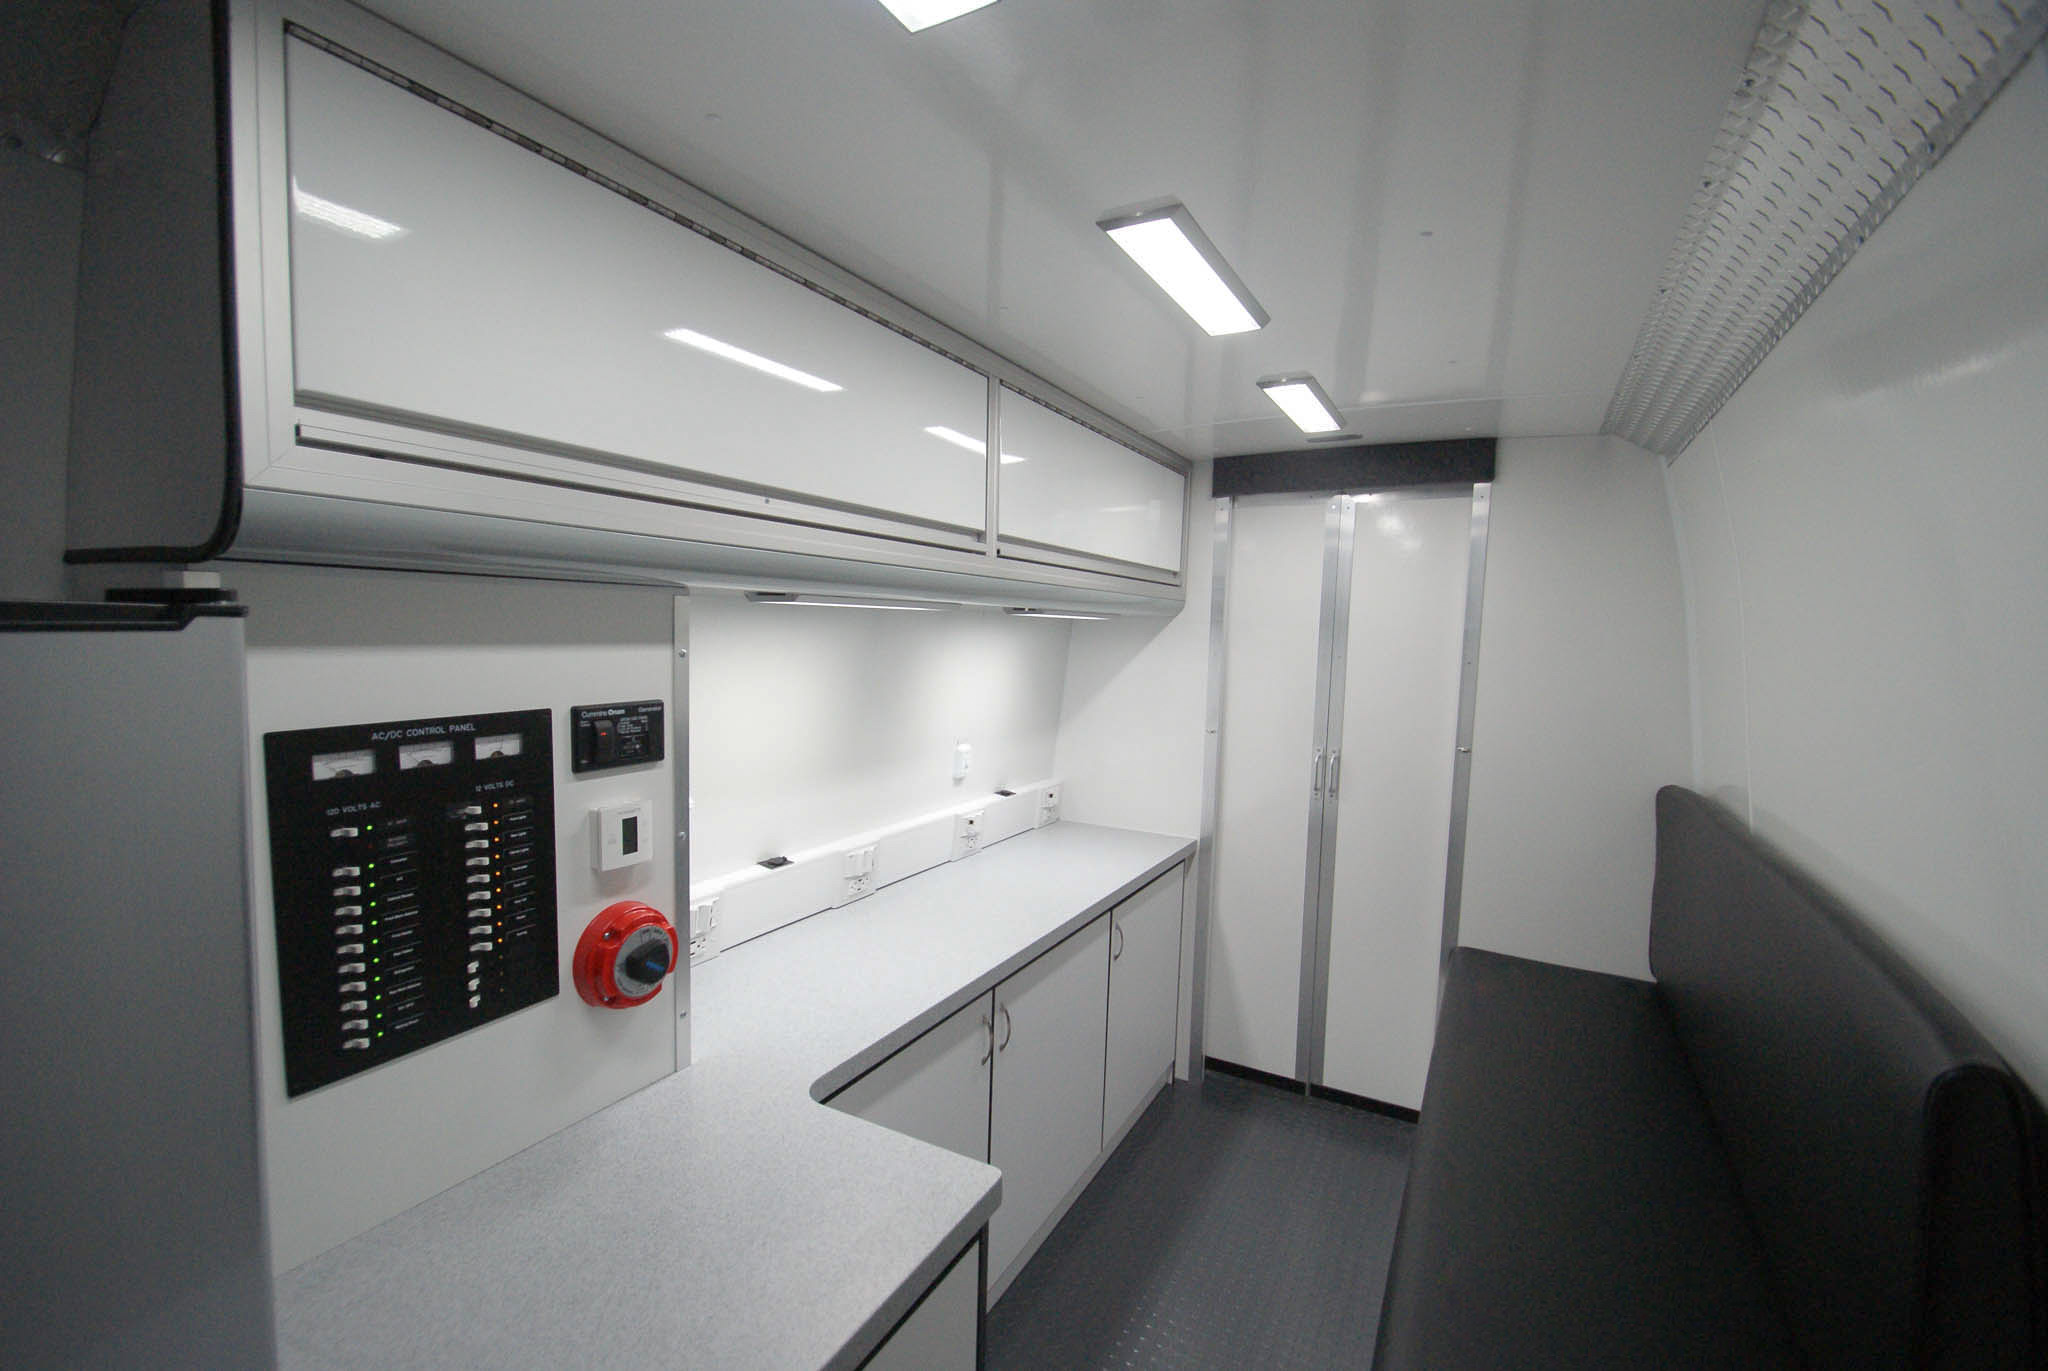 An angled view of the Mobile Outreach sprinter van's back room as seen from the rear entrance.